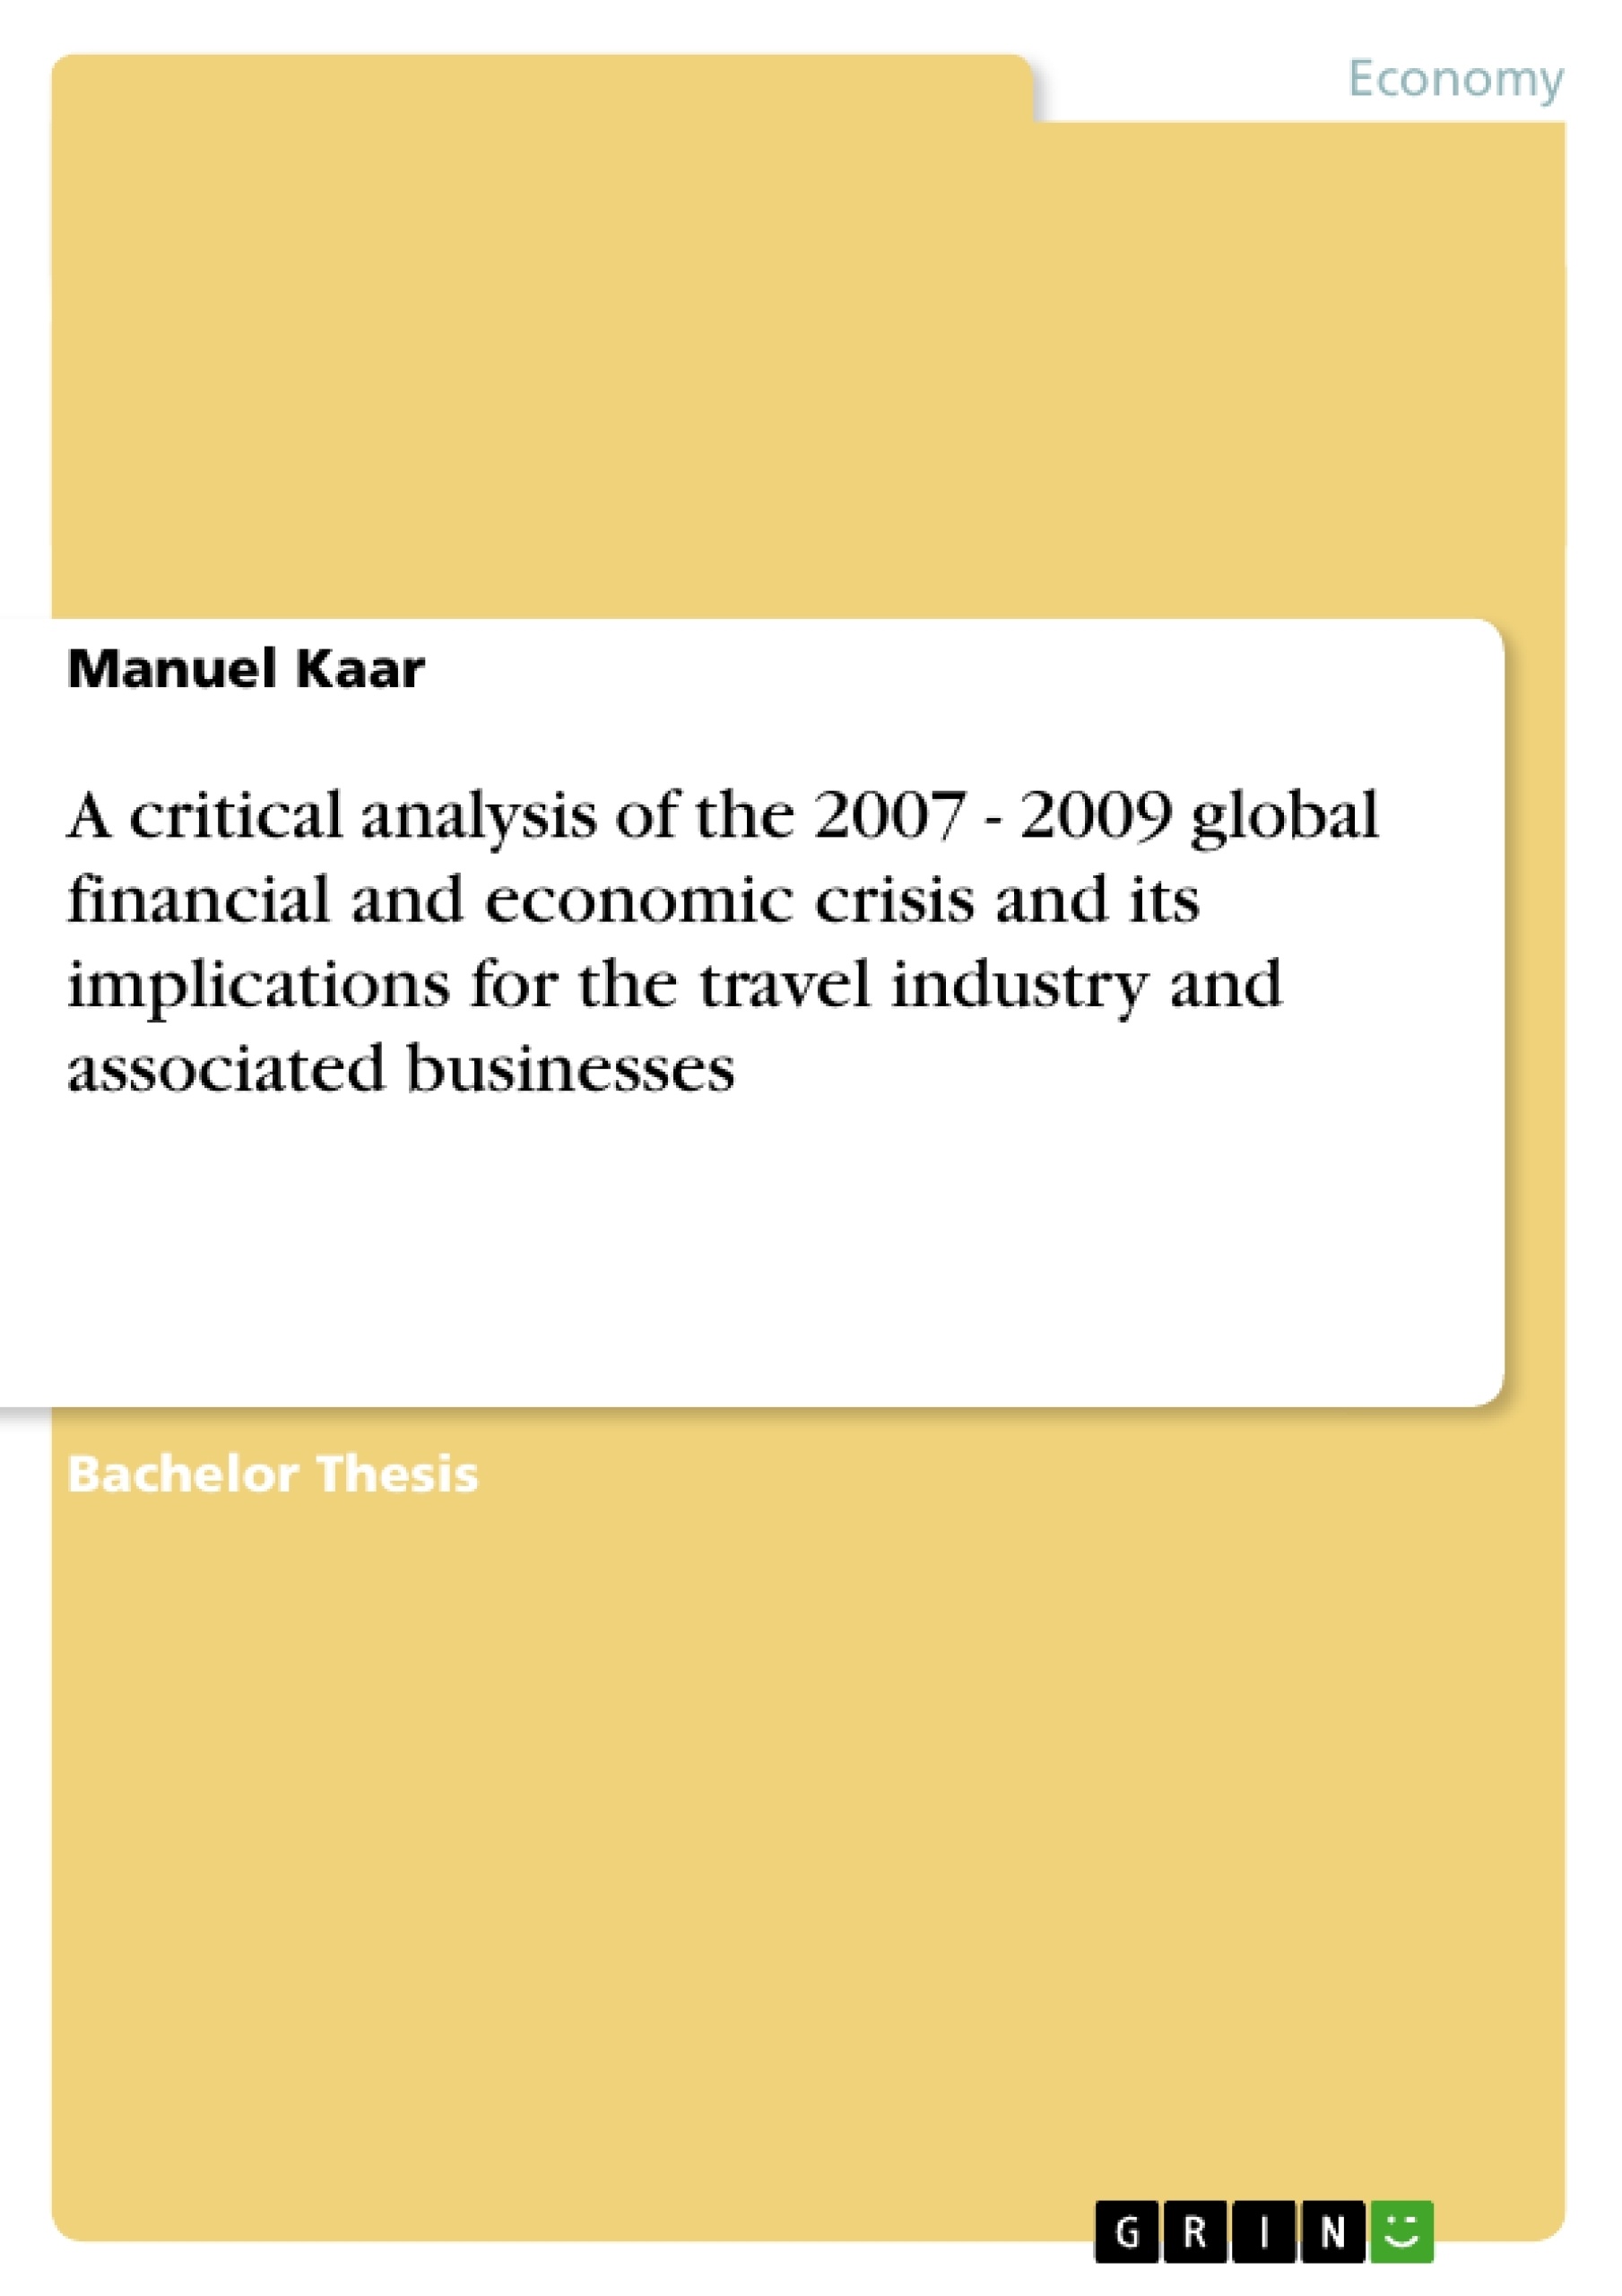 Title: A critical analysis of the 2007 - 2009 global financial and economic crisis and its implications for the travel industry and associated businesses